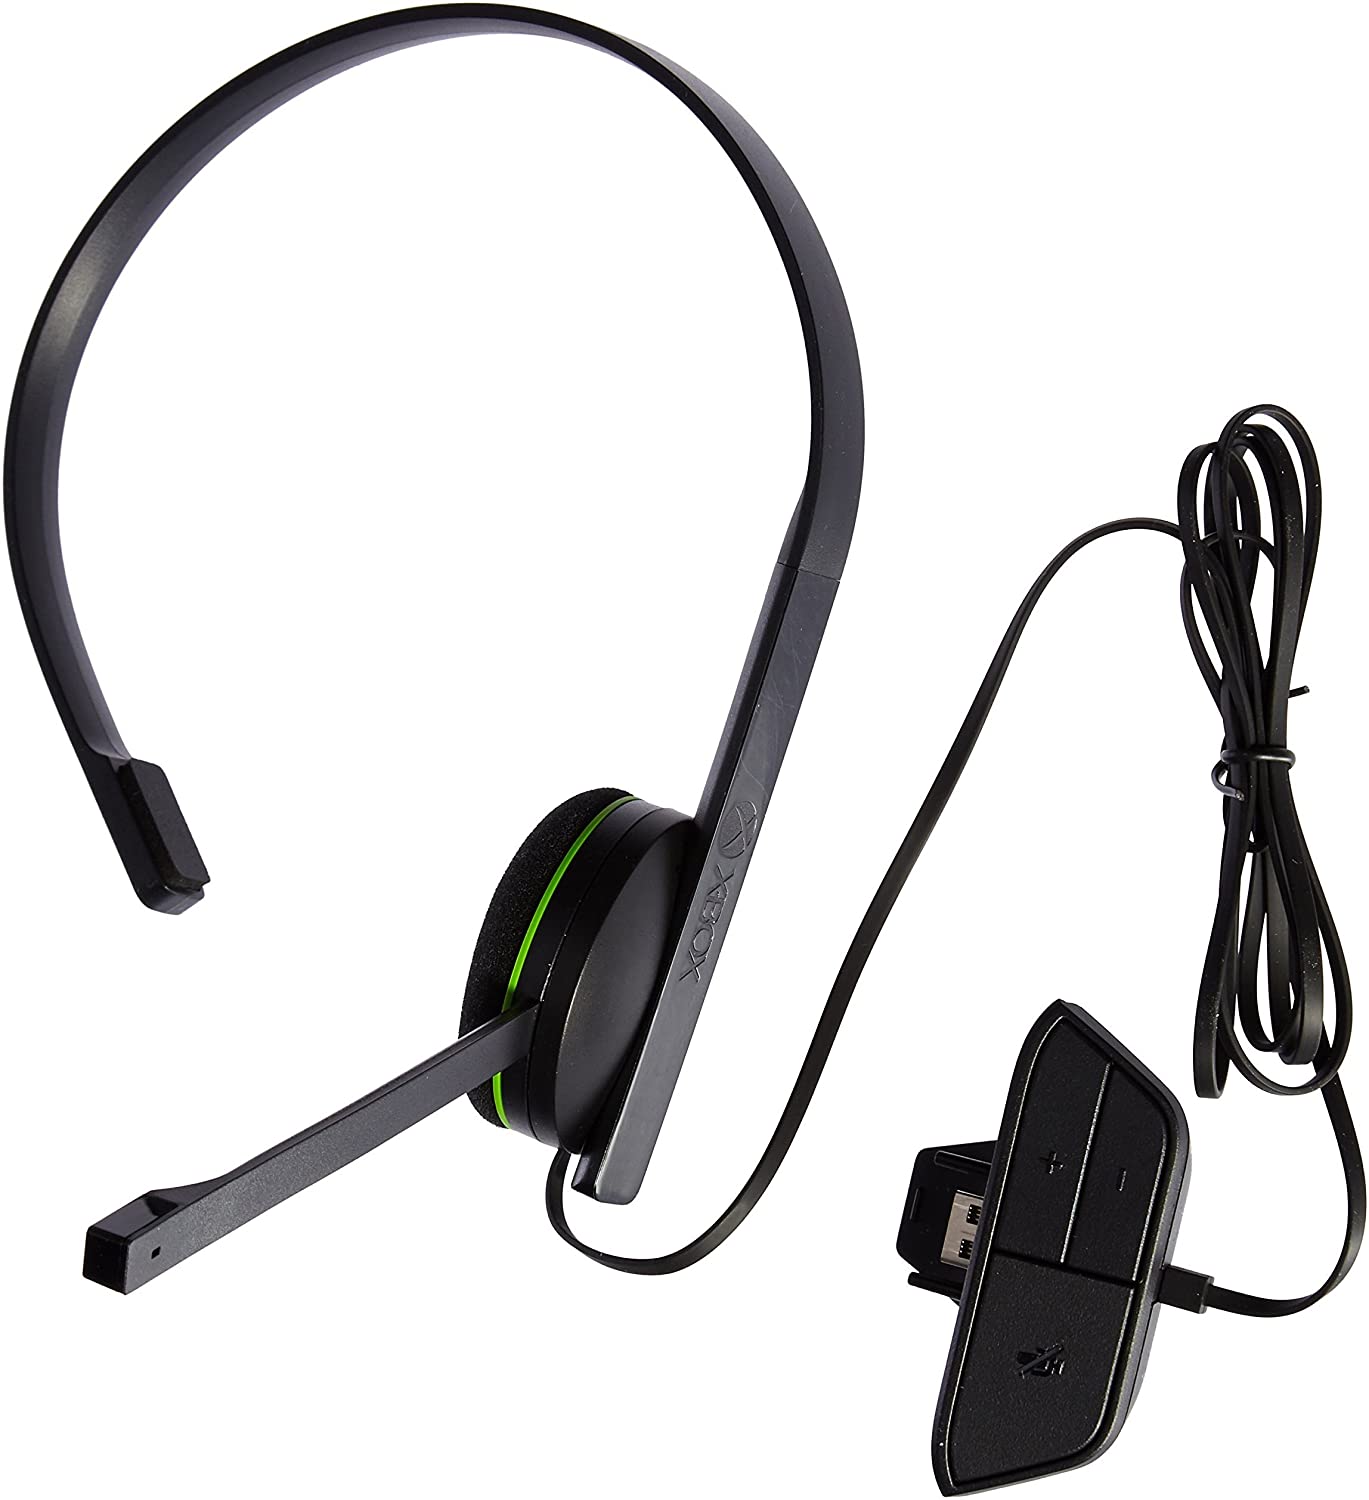 Microsoft - S5V-00014 Chat Headset for Xbox One, Xbox Series X, and Xbox Series S - Black